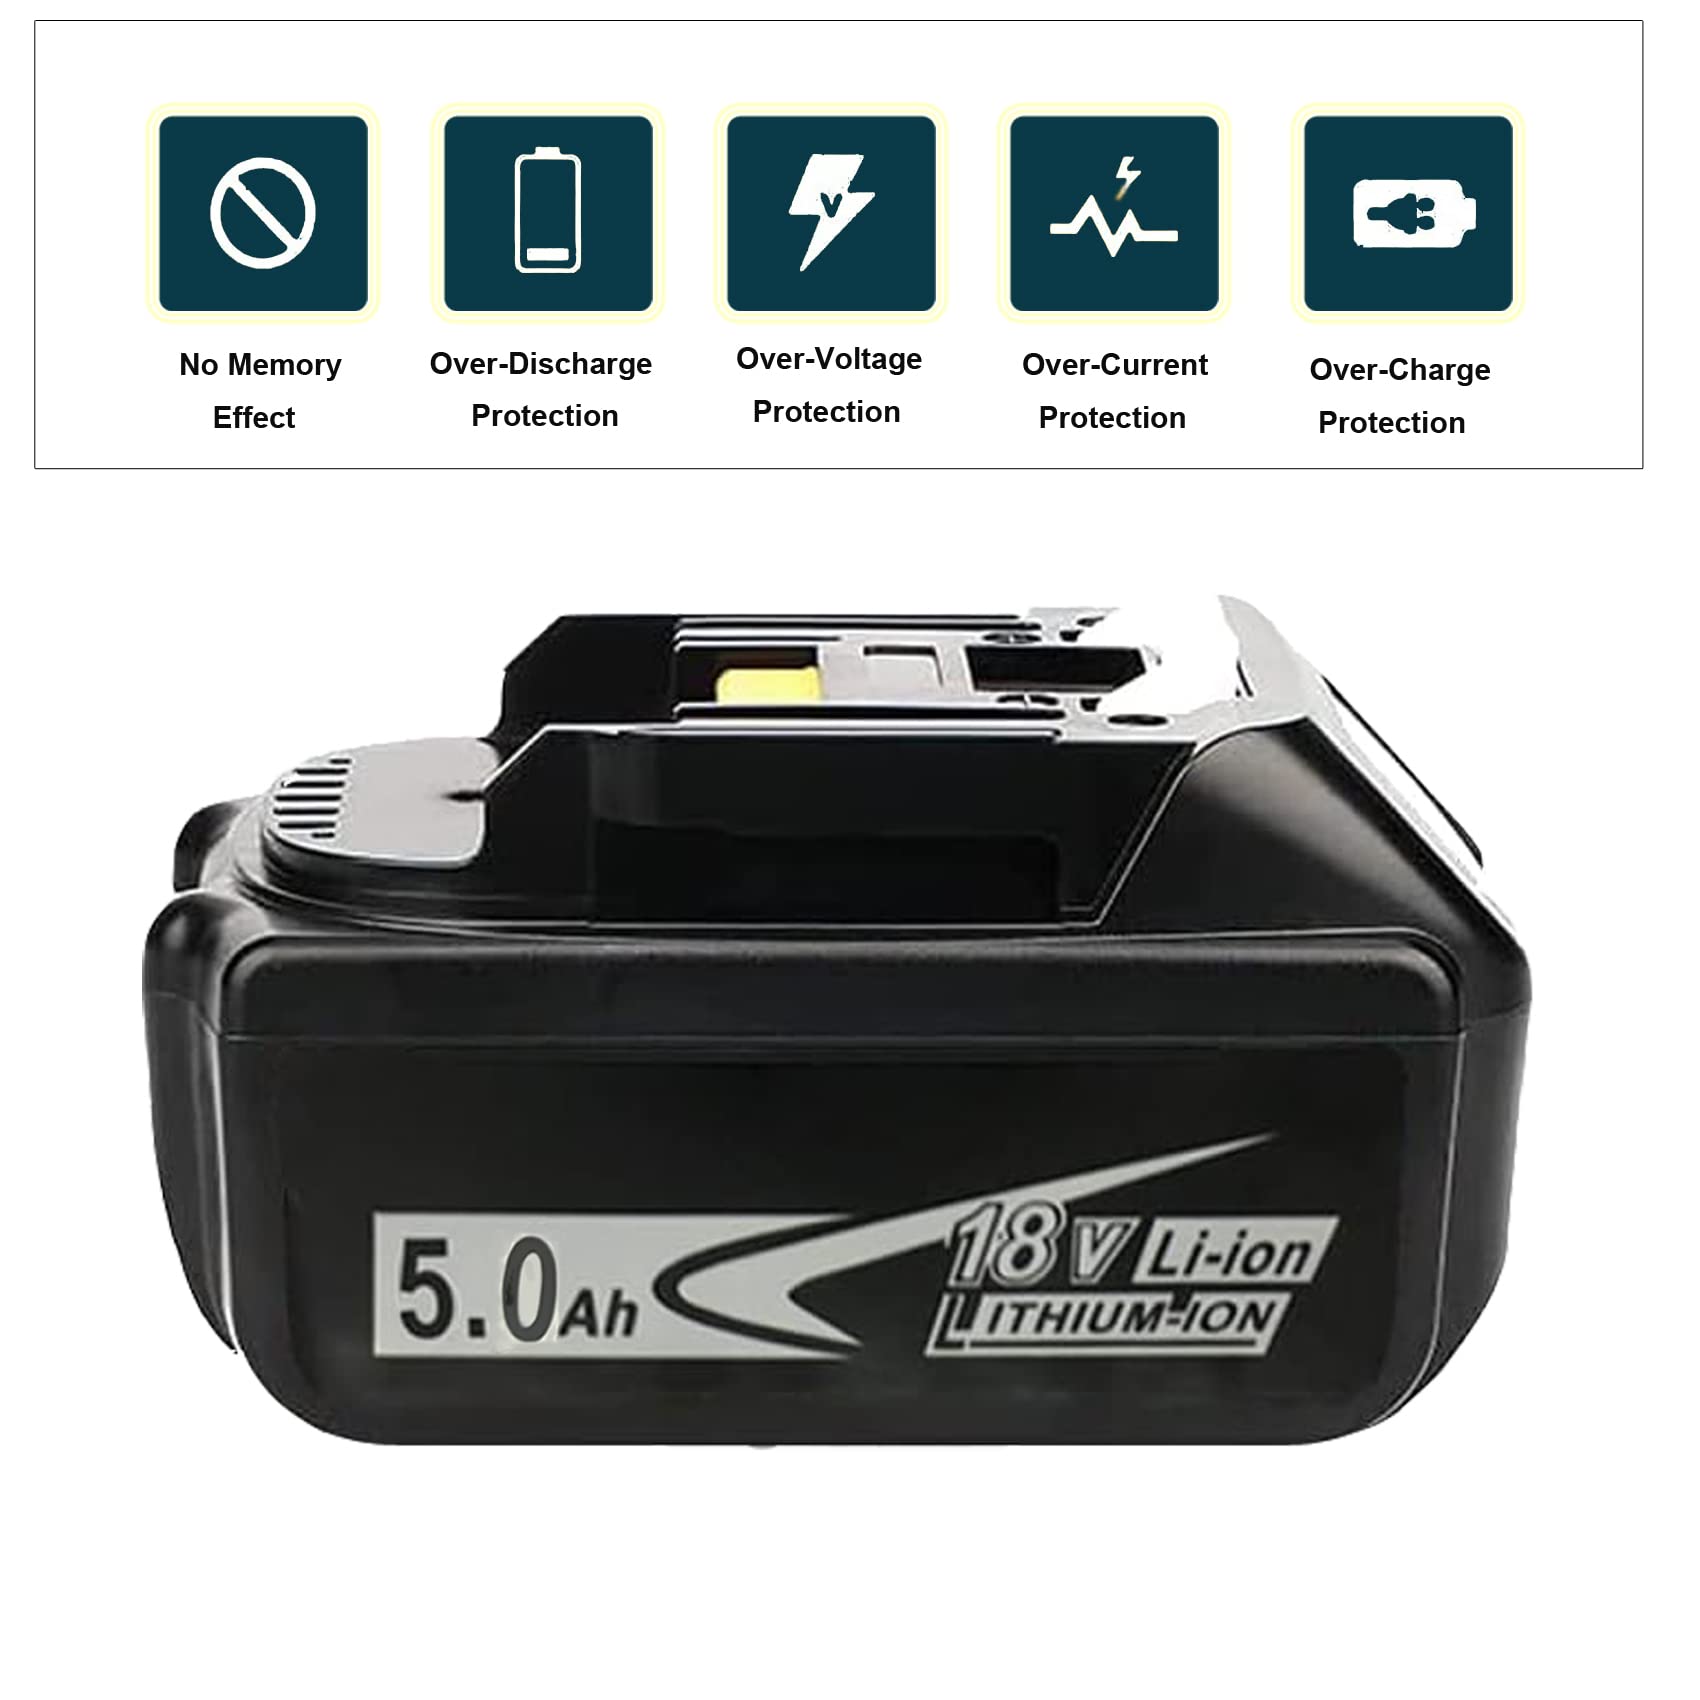 DEWQKI 2 Pack 18V 5.5Ah BL1850B Battery Replacement for Makita 18V Battery Compatible with Makita 18v Tools,Fit with Makita 18V Battery Charger (Makita 18volt Battery)